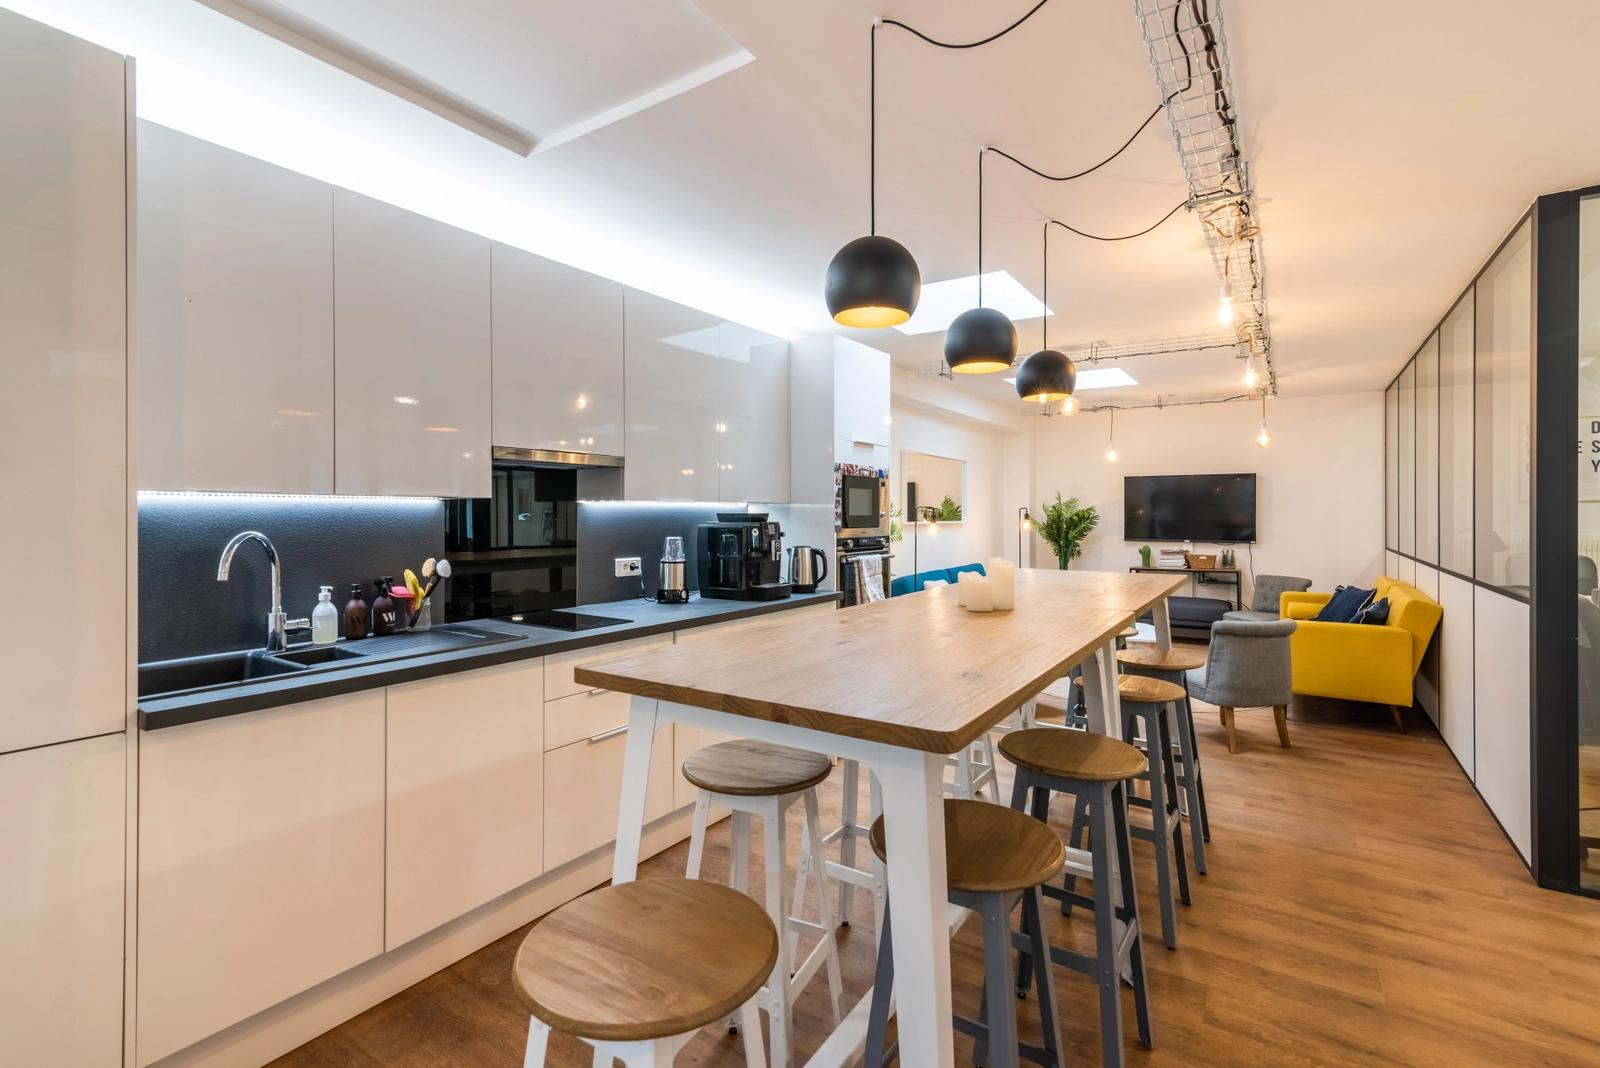 Warm, modern space in the heart of the 7th arrondissement